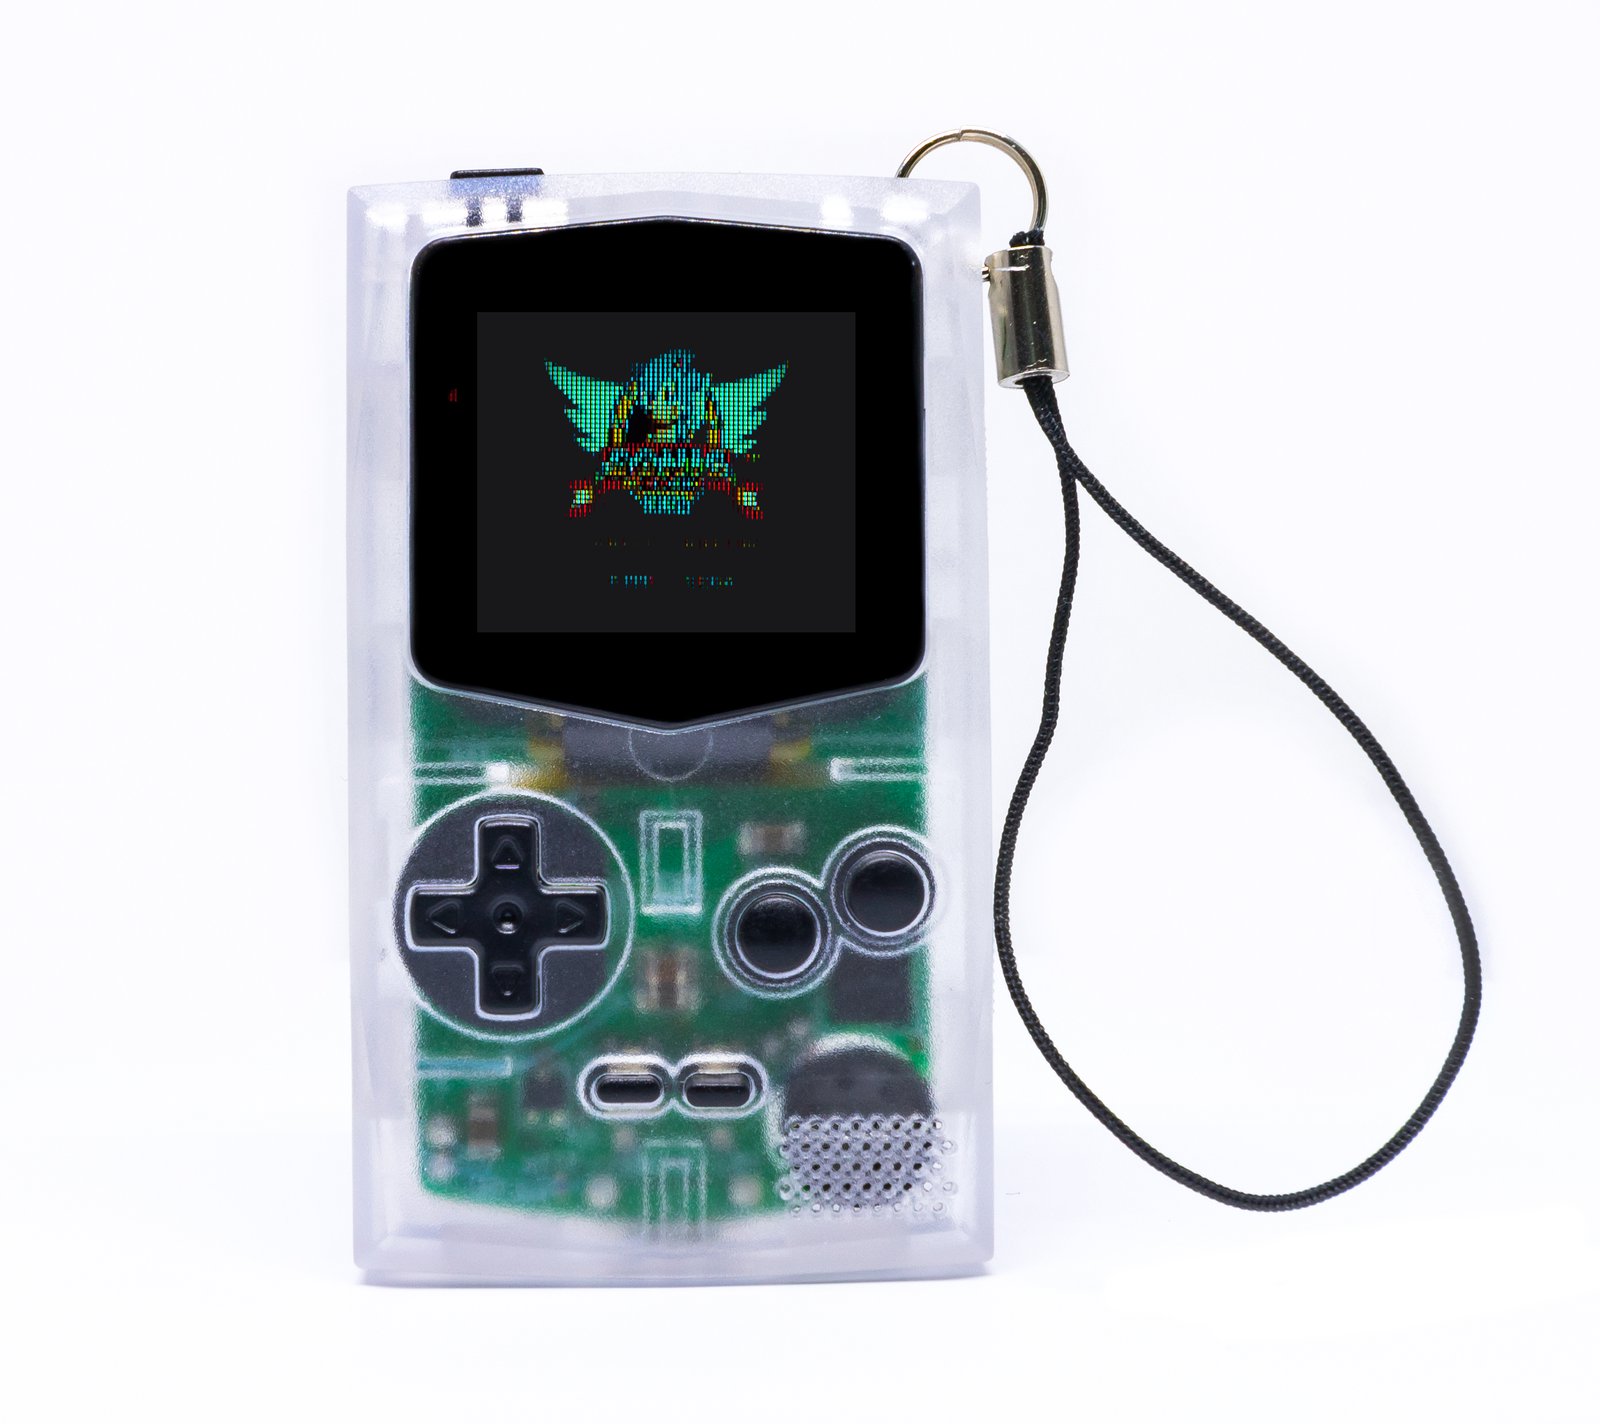 GBA Style Handheld Game Console ESP32 Support NES Gameboy GB GBC